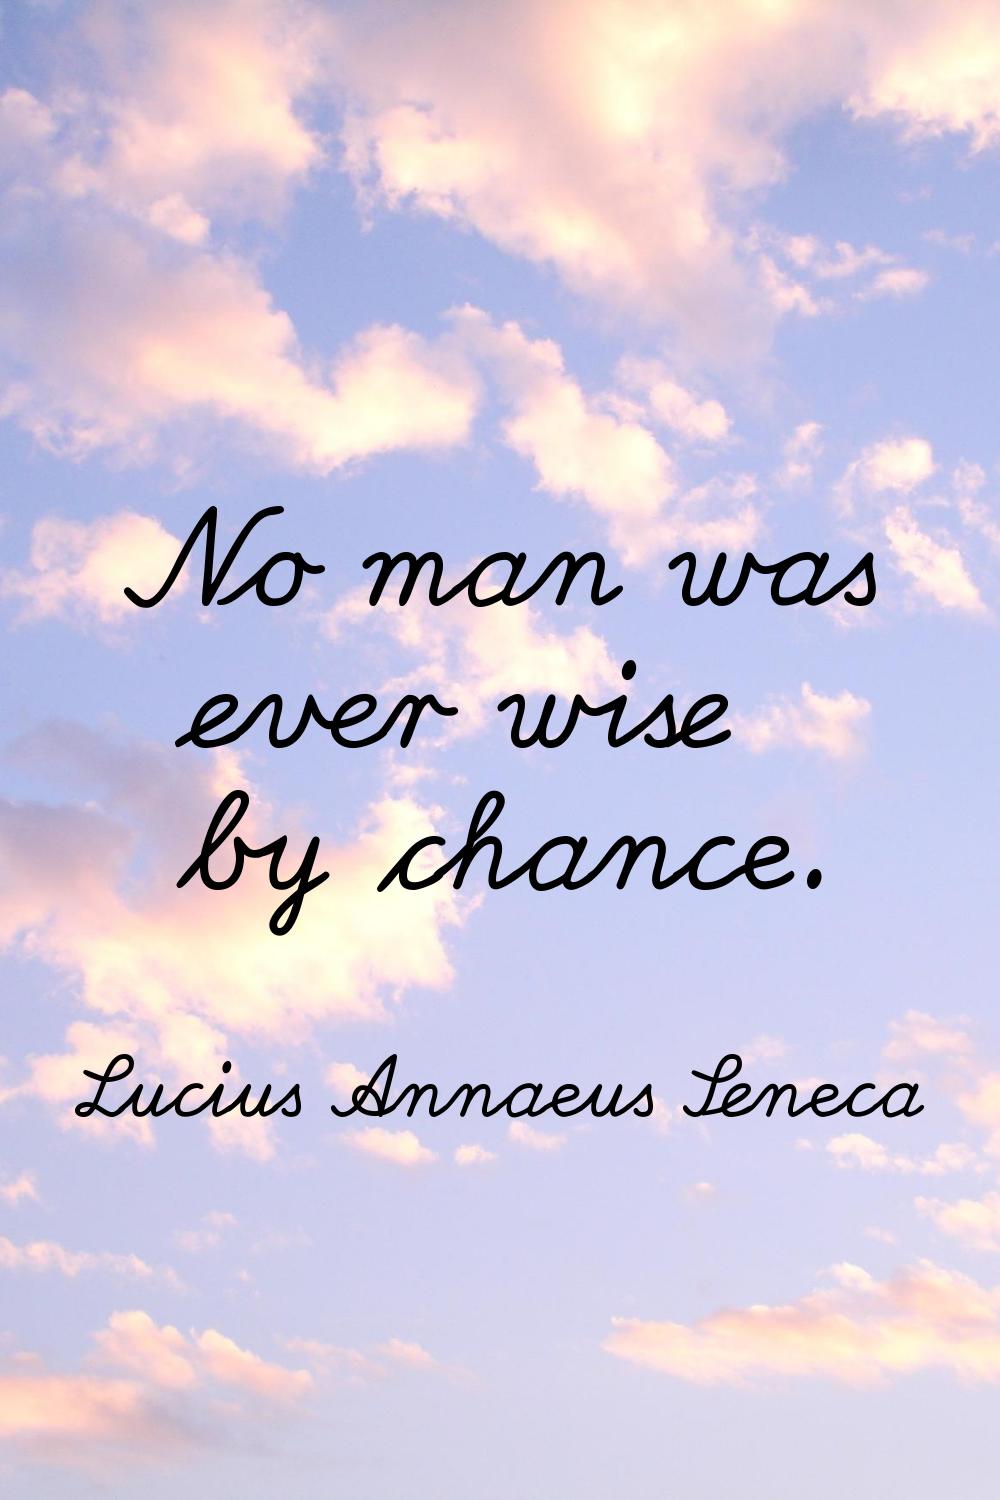 No man was ever wise by chance.